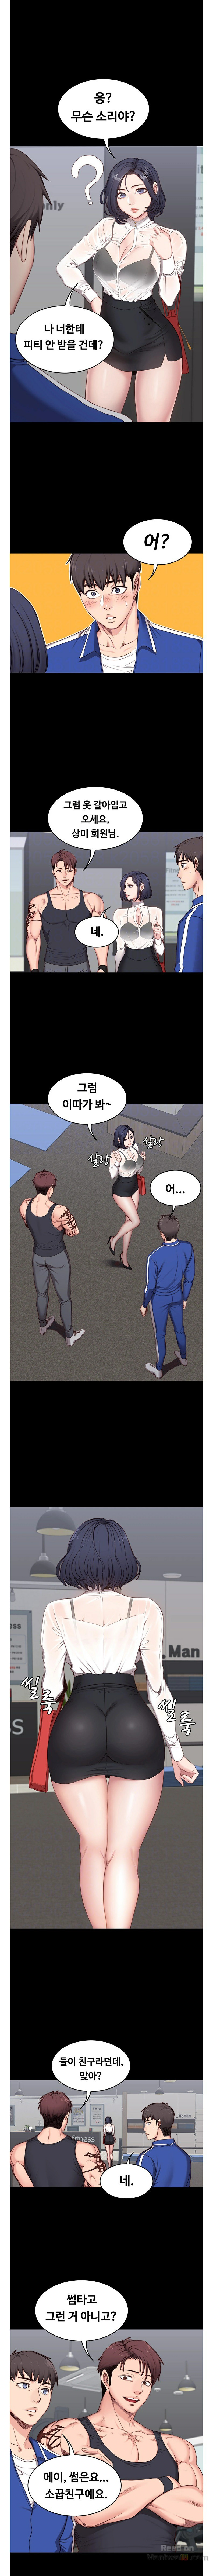 Fitness Raw - Chapter 2 Page 3